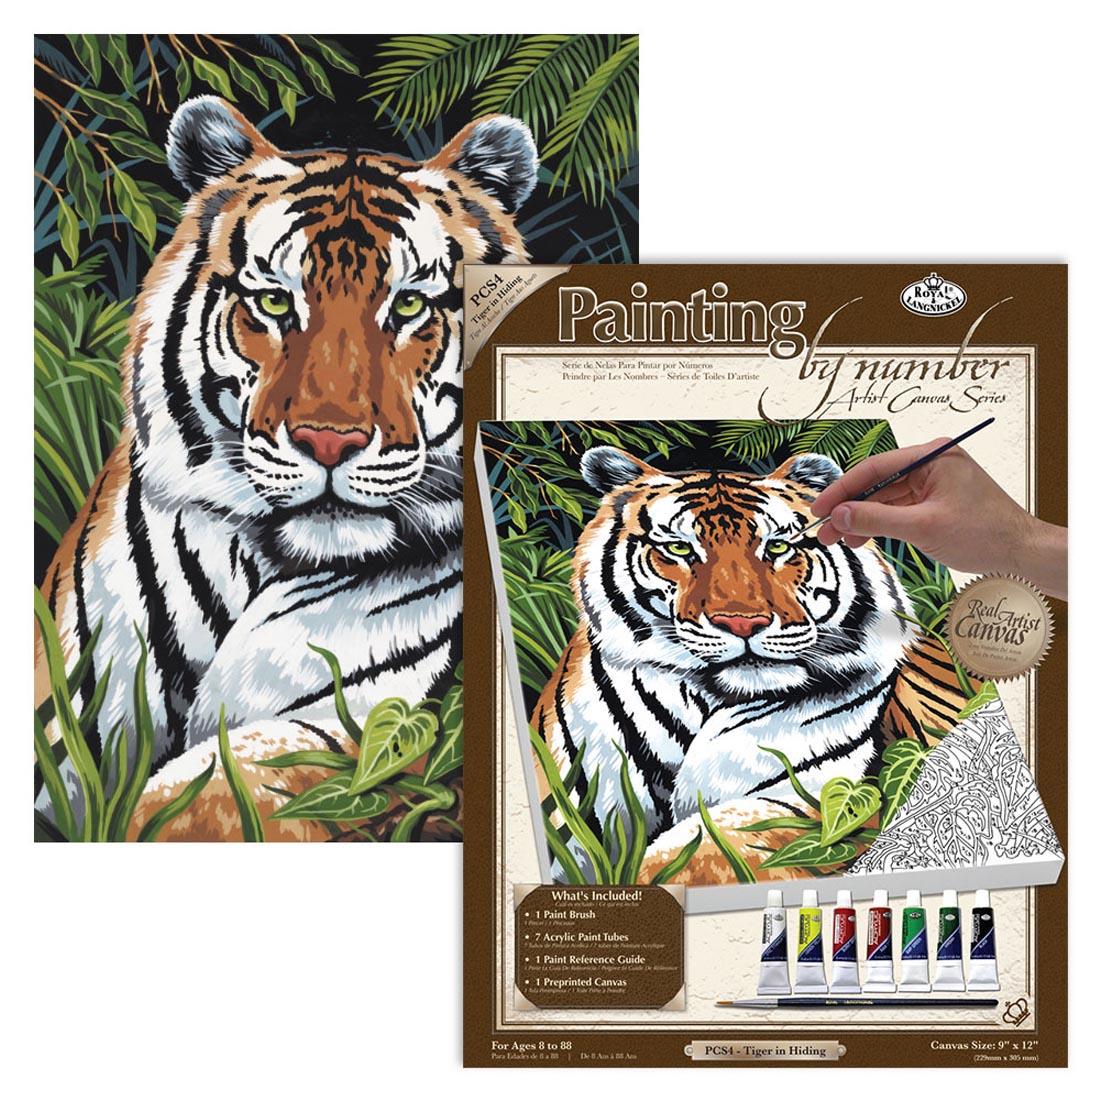 Royal & Langnickel Painting By Number Artist Canvas Series: Tiger in Hiding package with the completed painting behind it